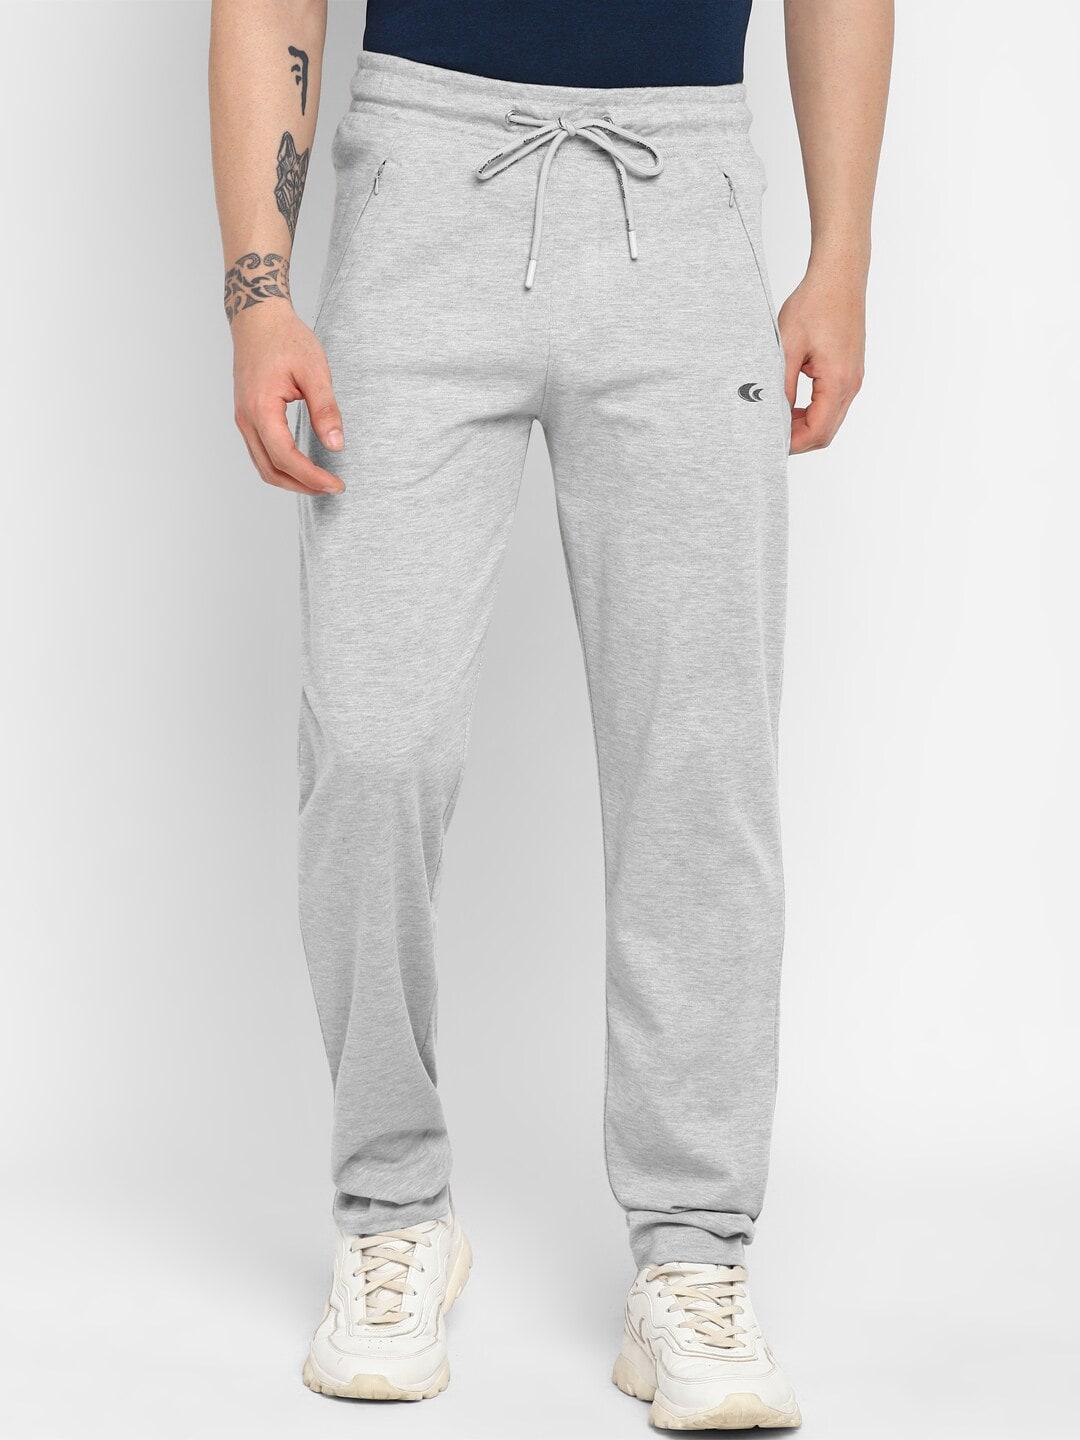 allen-cooper-men-grey-relaxed-fit-antimicrobial-track-pants